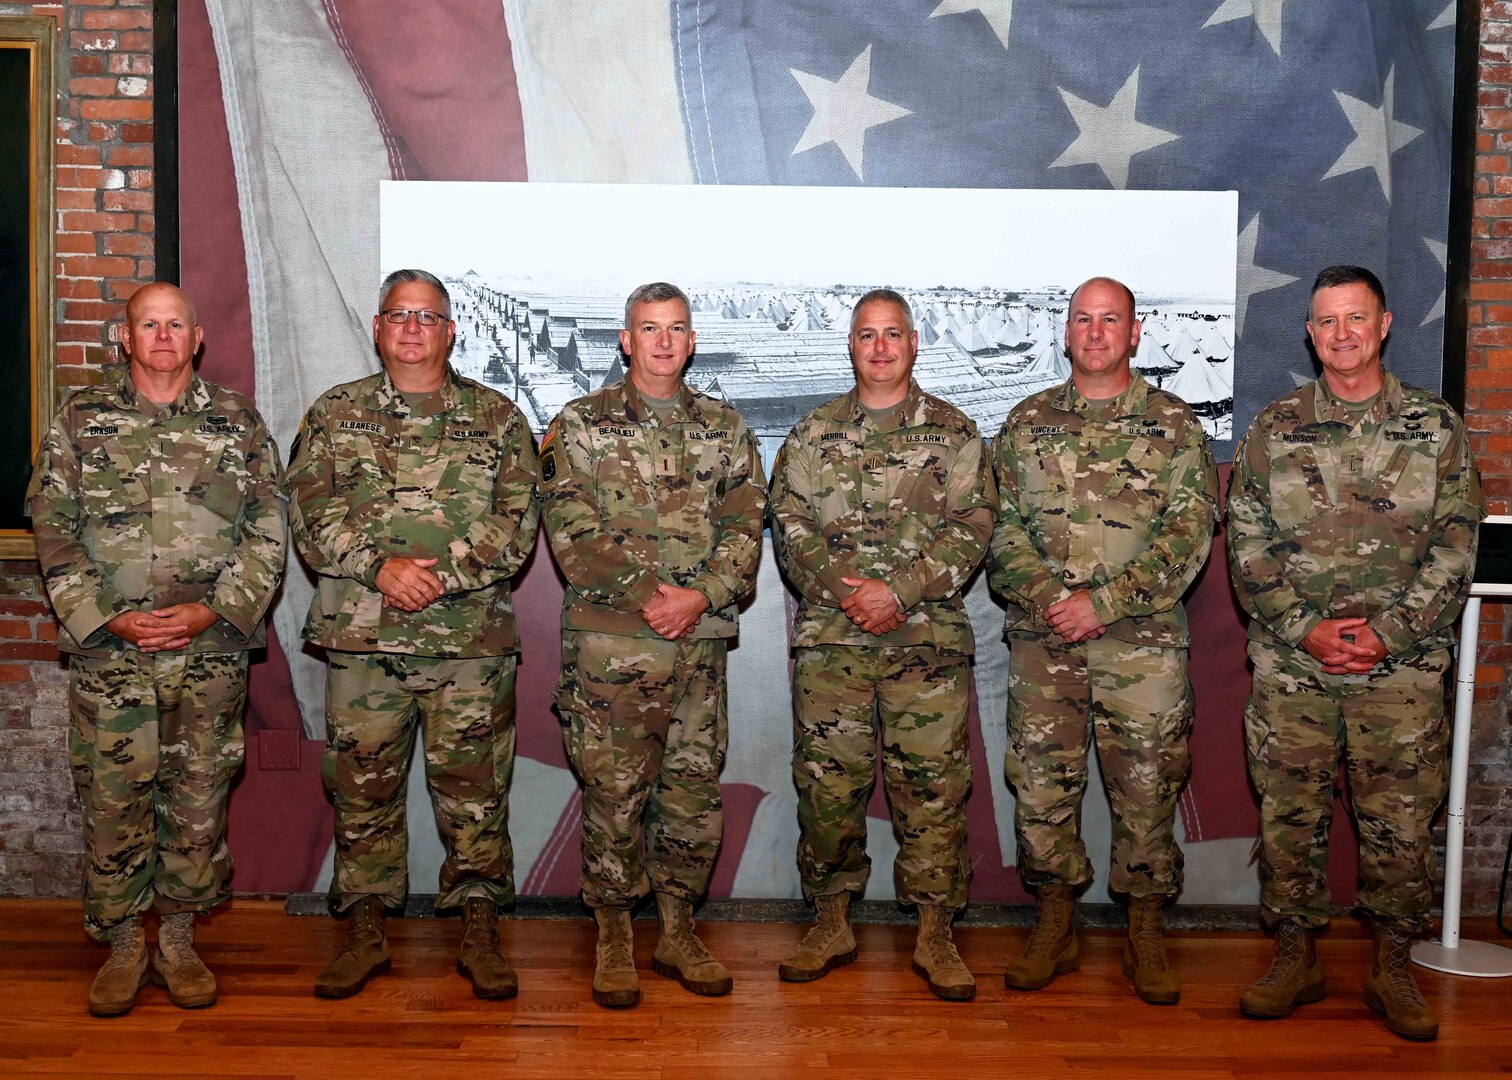 From left, Chief Warrant Officer 5 Brian Erkson of Connecticut; Chief Warrant Officer Frank Albanese of New Jersey; Chief Warrant Officer 5 Scott Beaulieu of Vermont; Chief Warrant Officer 5 Chris Merrill of Maine; Chief Warrant Officer 5 Jay Vincent of Massachusetts; and Chief Warrant Officer 5 George Munson of New Hampshire pose at the state military reservation's Heritage Room in Concord New Hampshire on June 23, 2022.